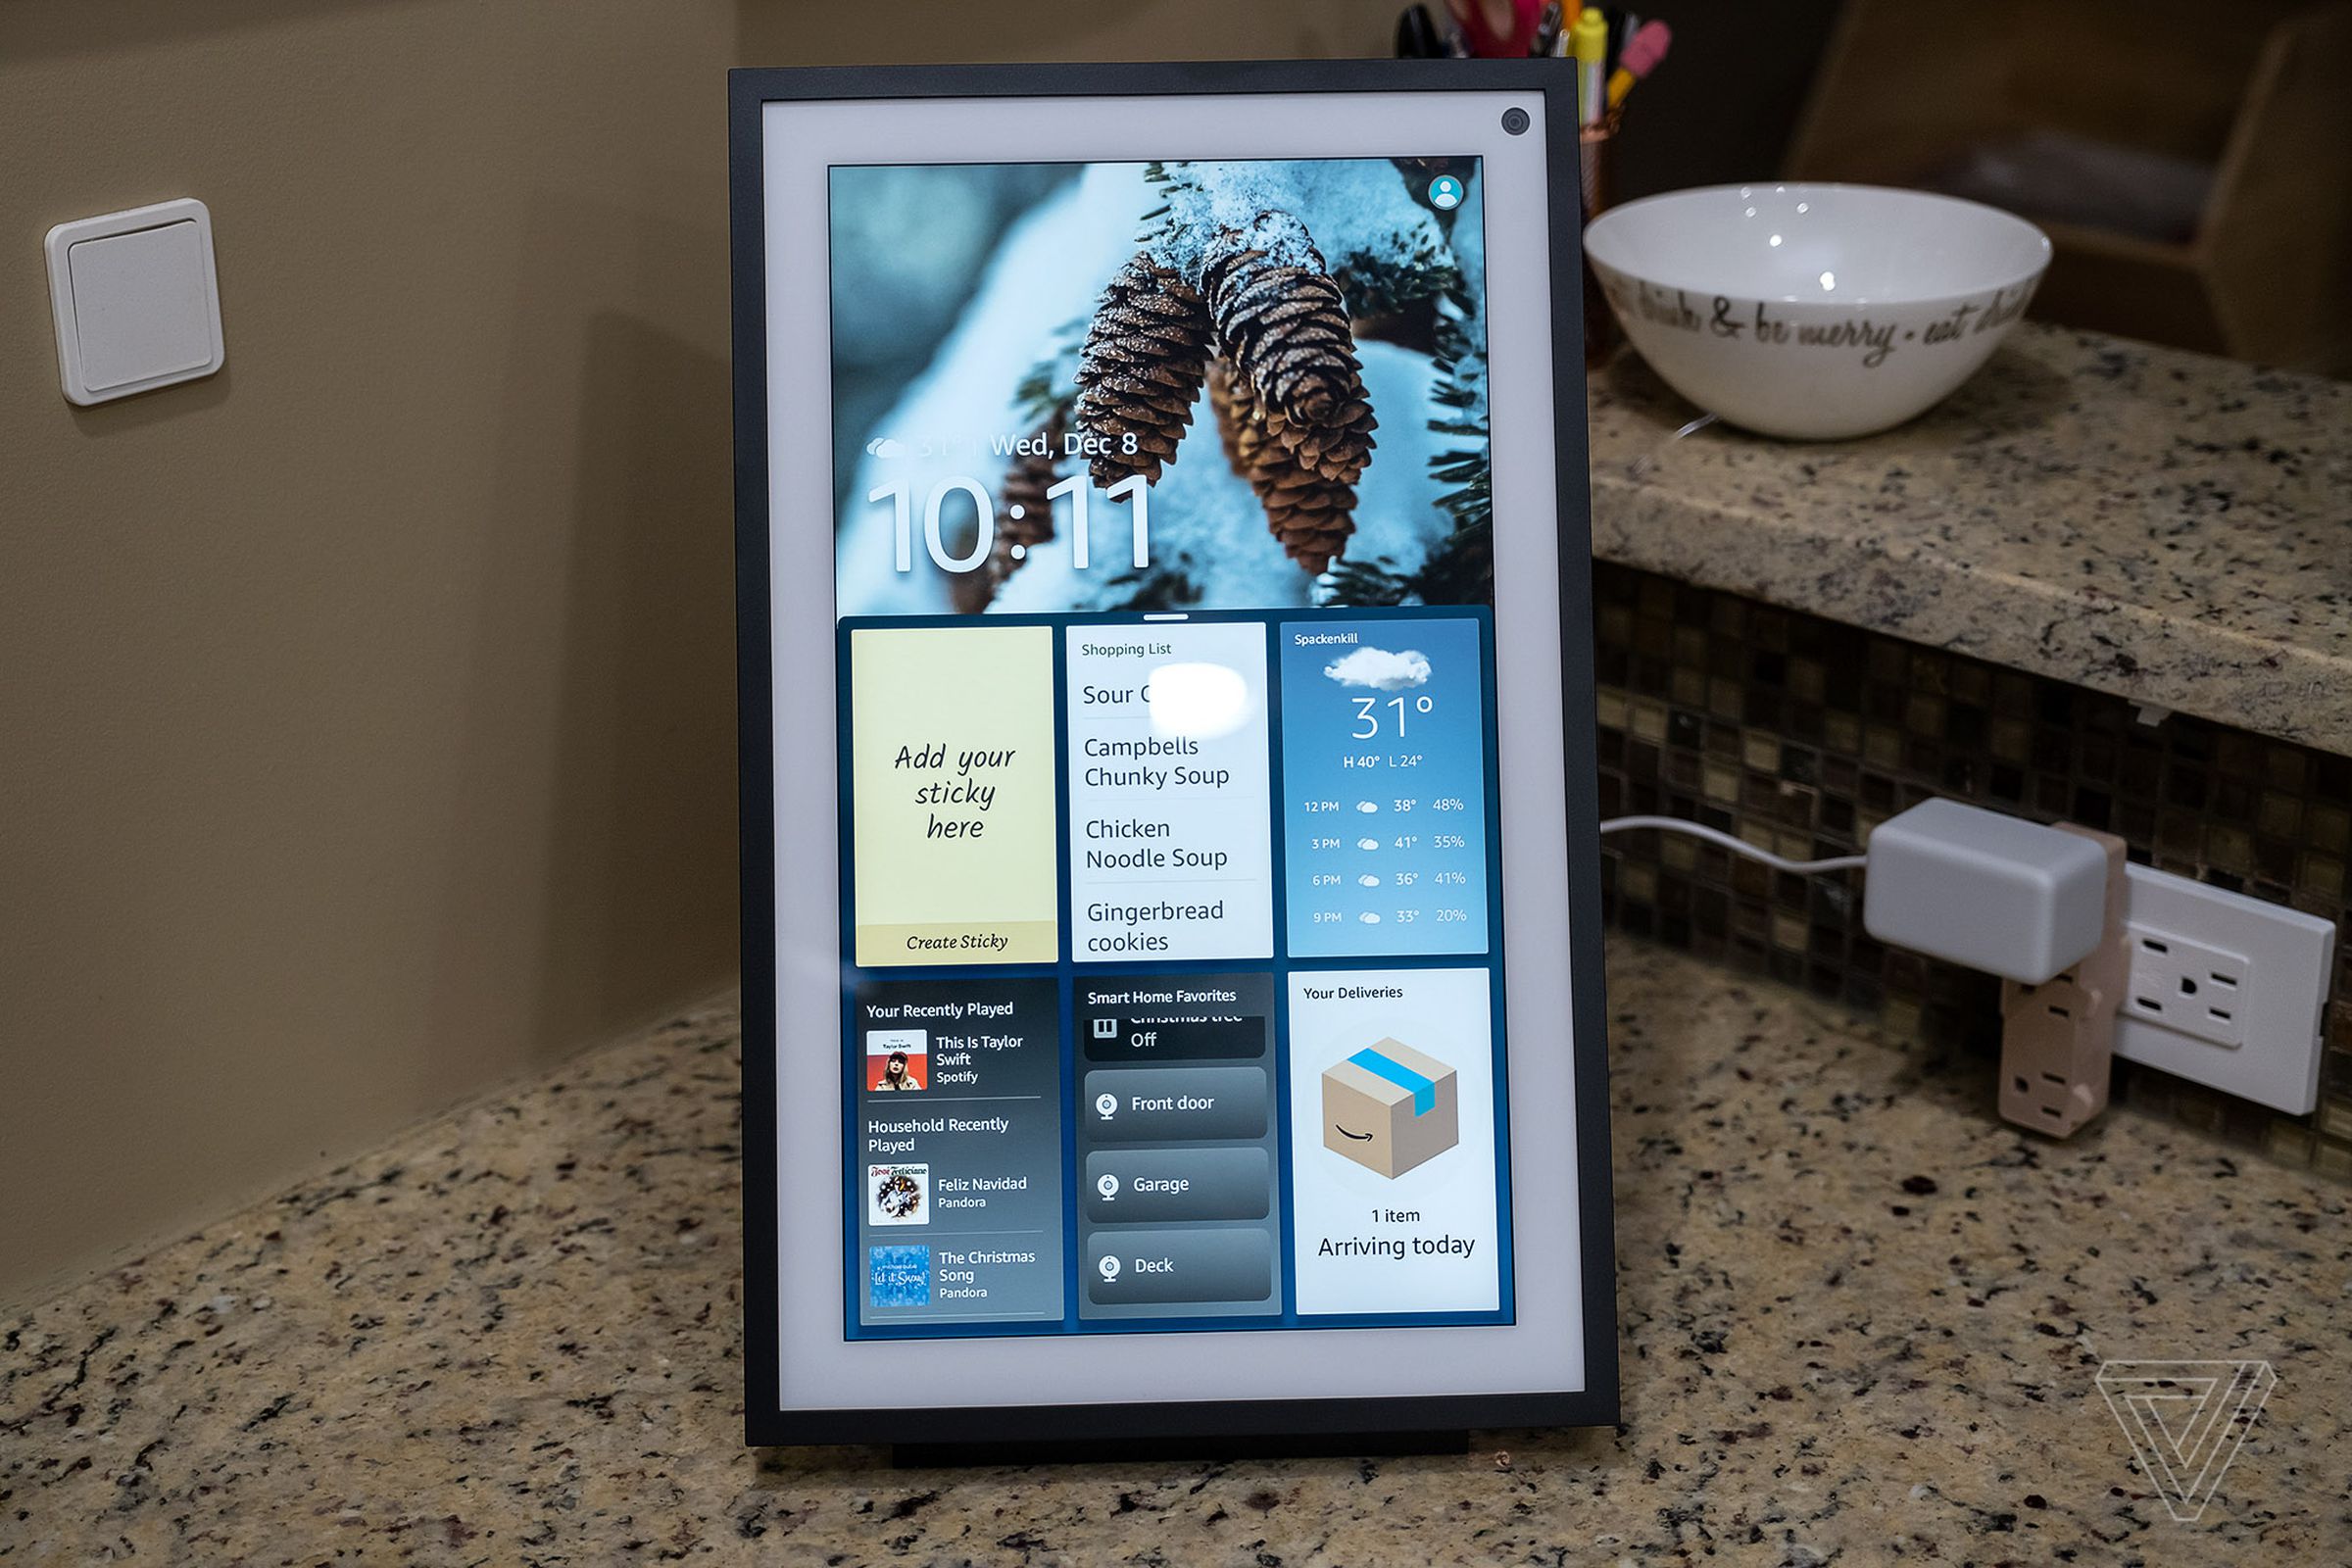 You can mount the Echo Show 15 on the wall in either a portrait or landscape orientation.